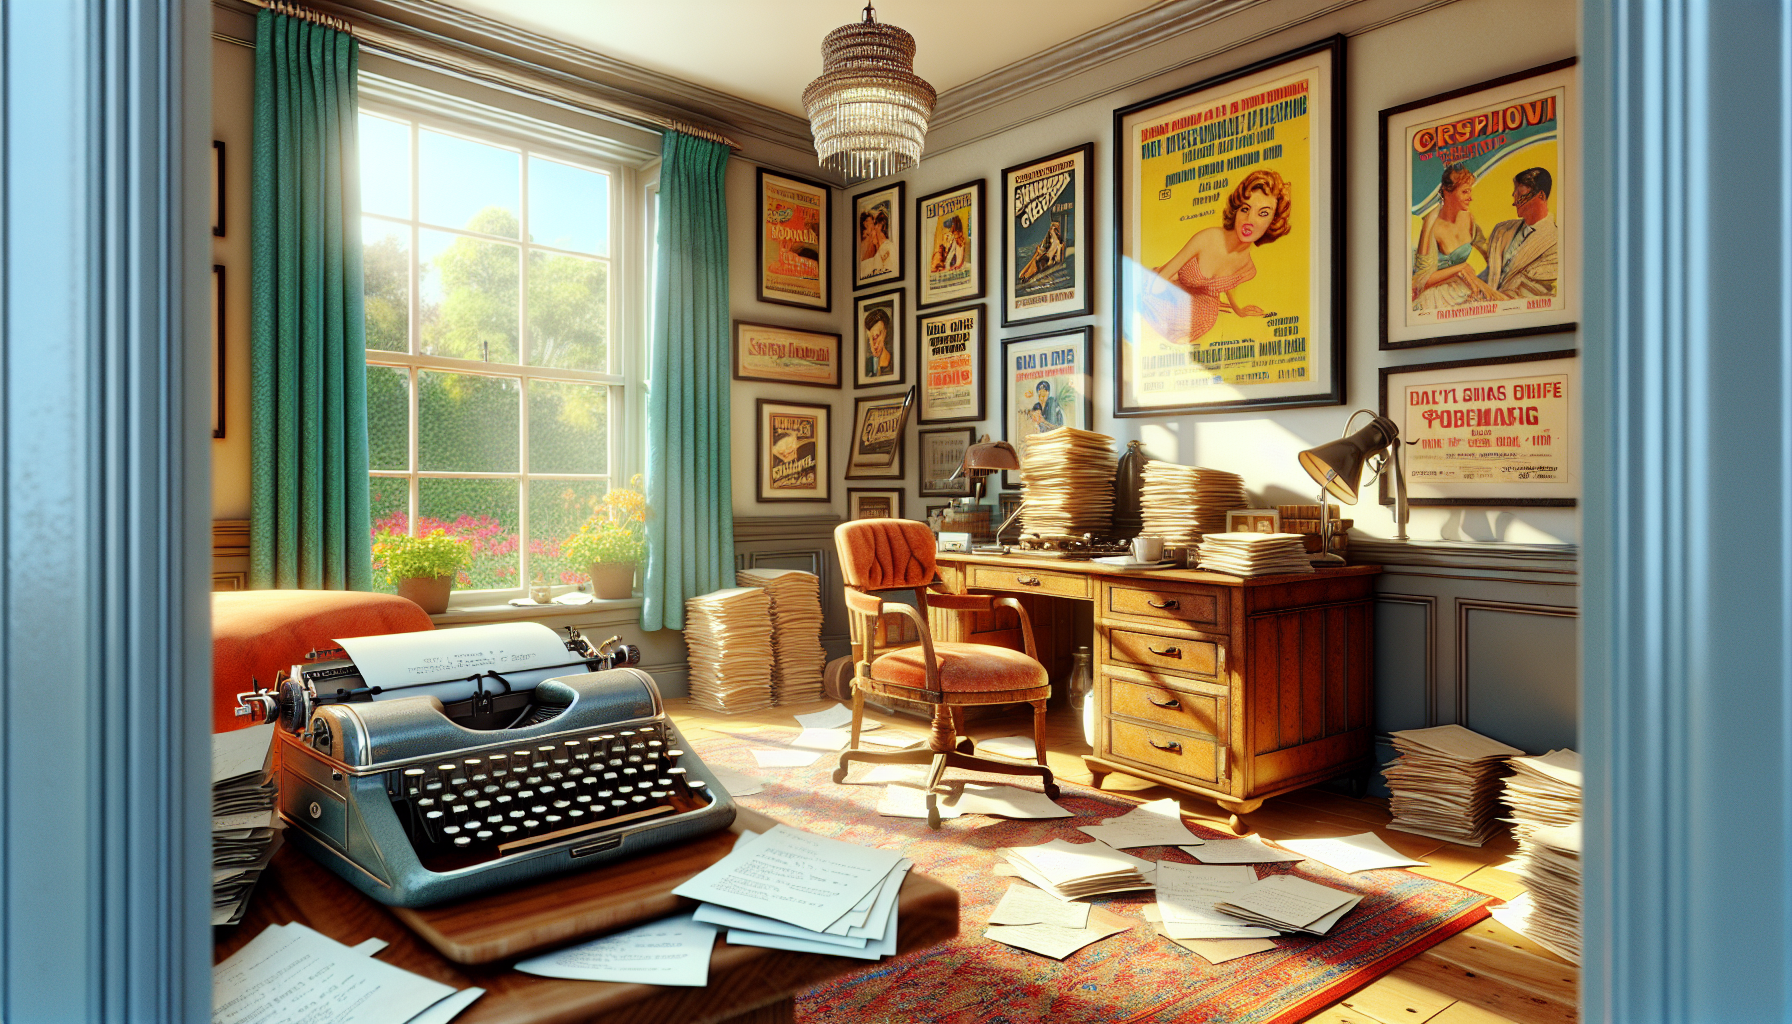 Cozy home office filled with film scripts, vintage typewriter, framed movie posters, and a large window overlooking a sunny garden, embodying the warm, inviting aesthetic of Nancy Meyers' films